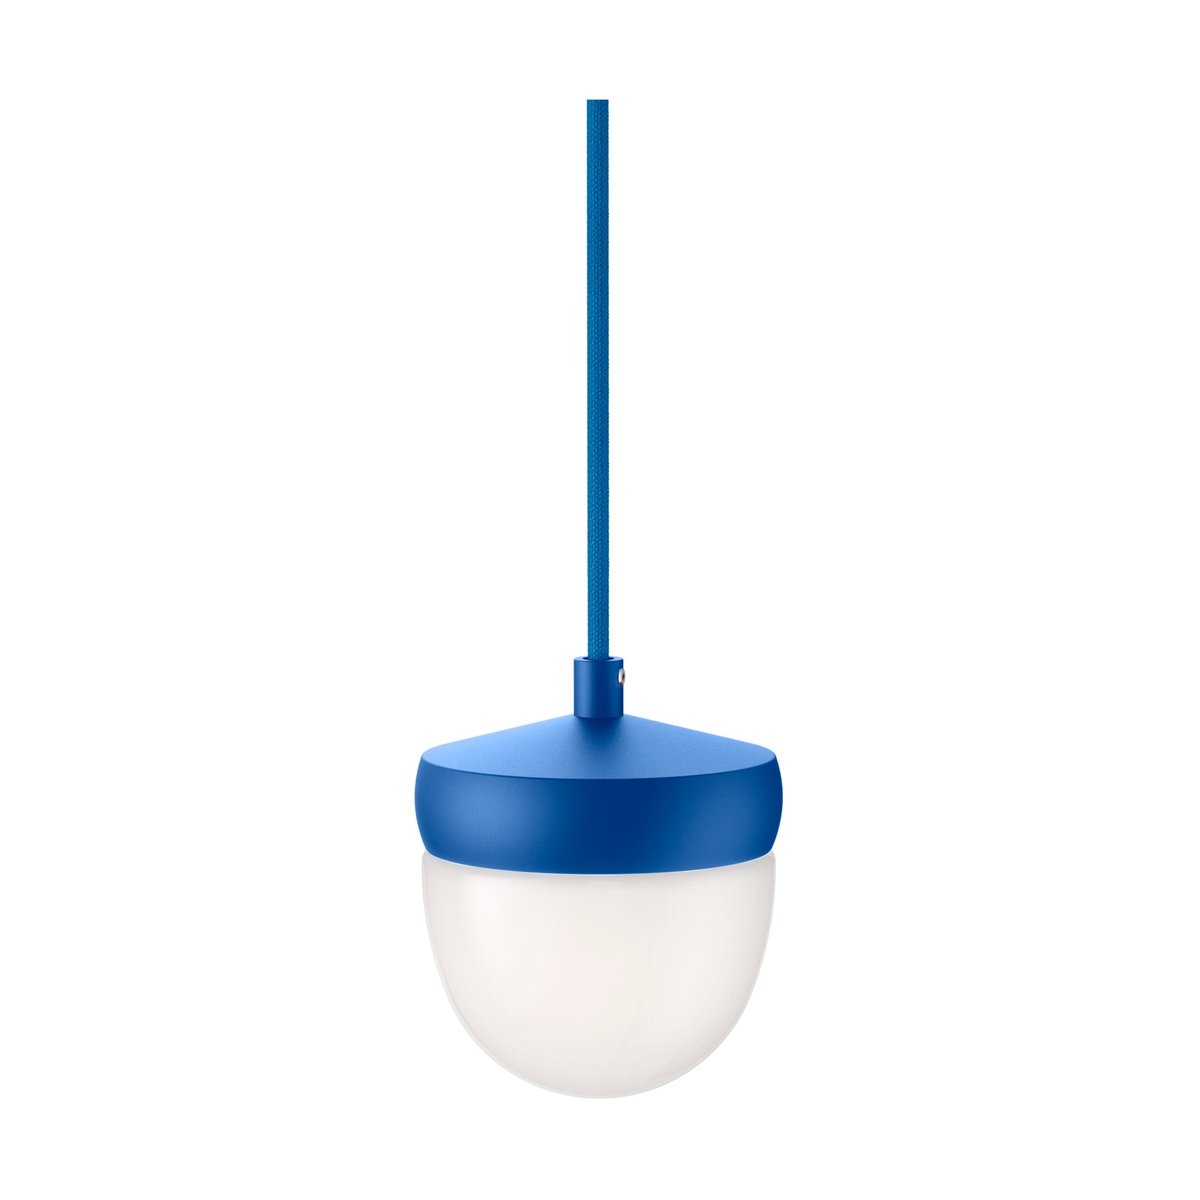 Noon Pan hanglamp frosted 10 cm Blauw-blauw